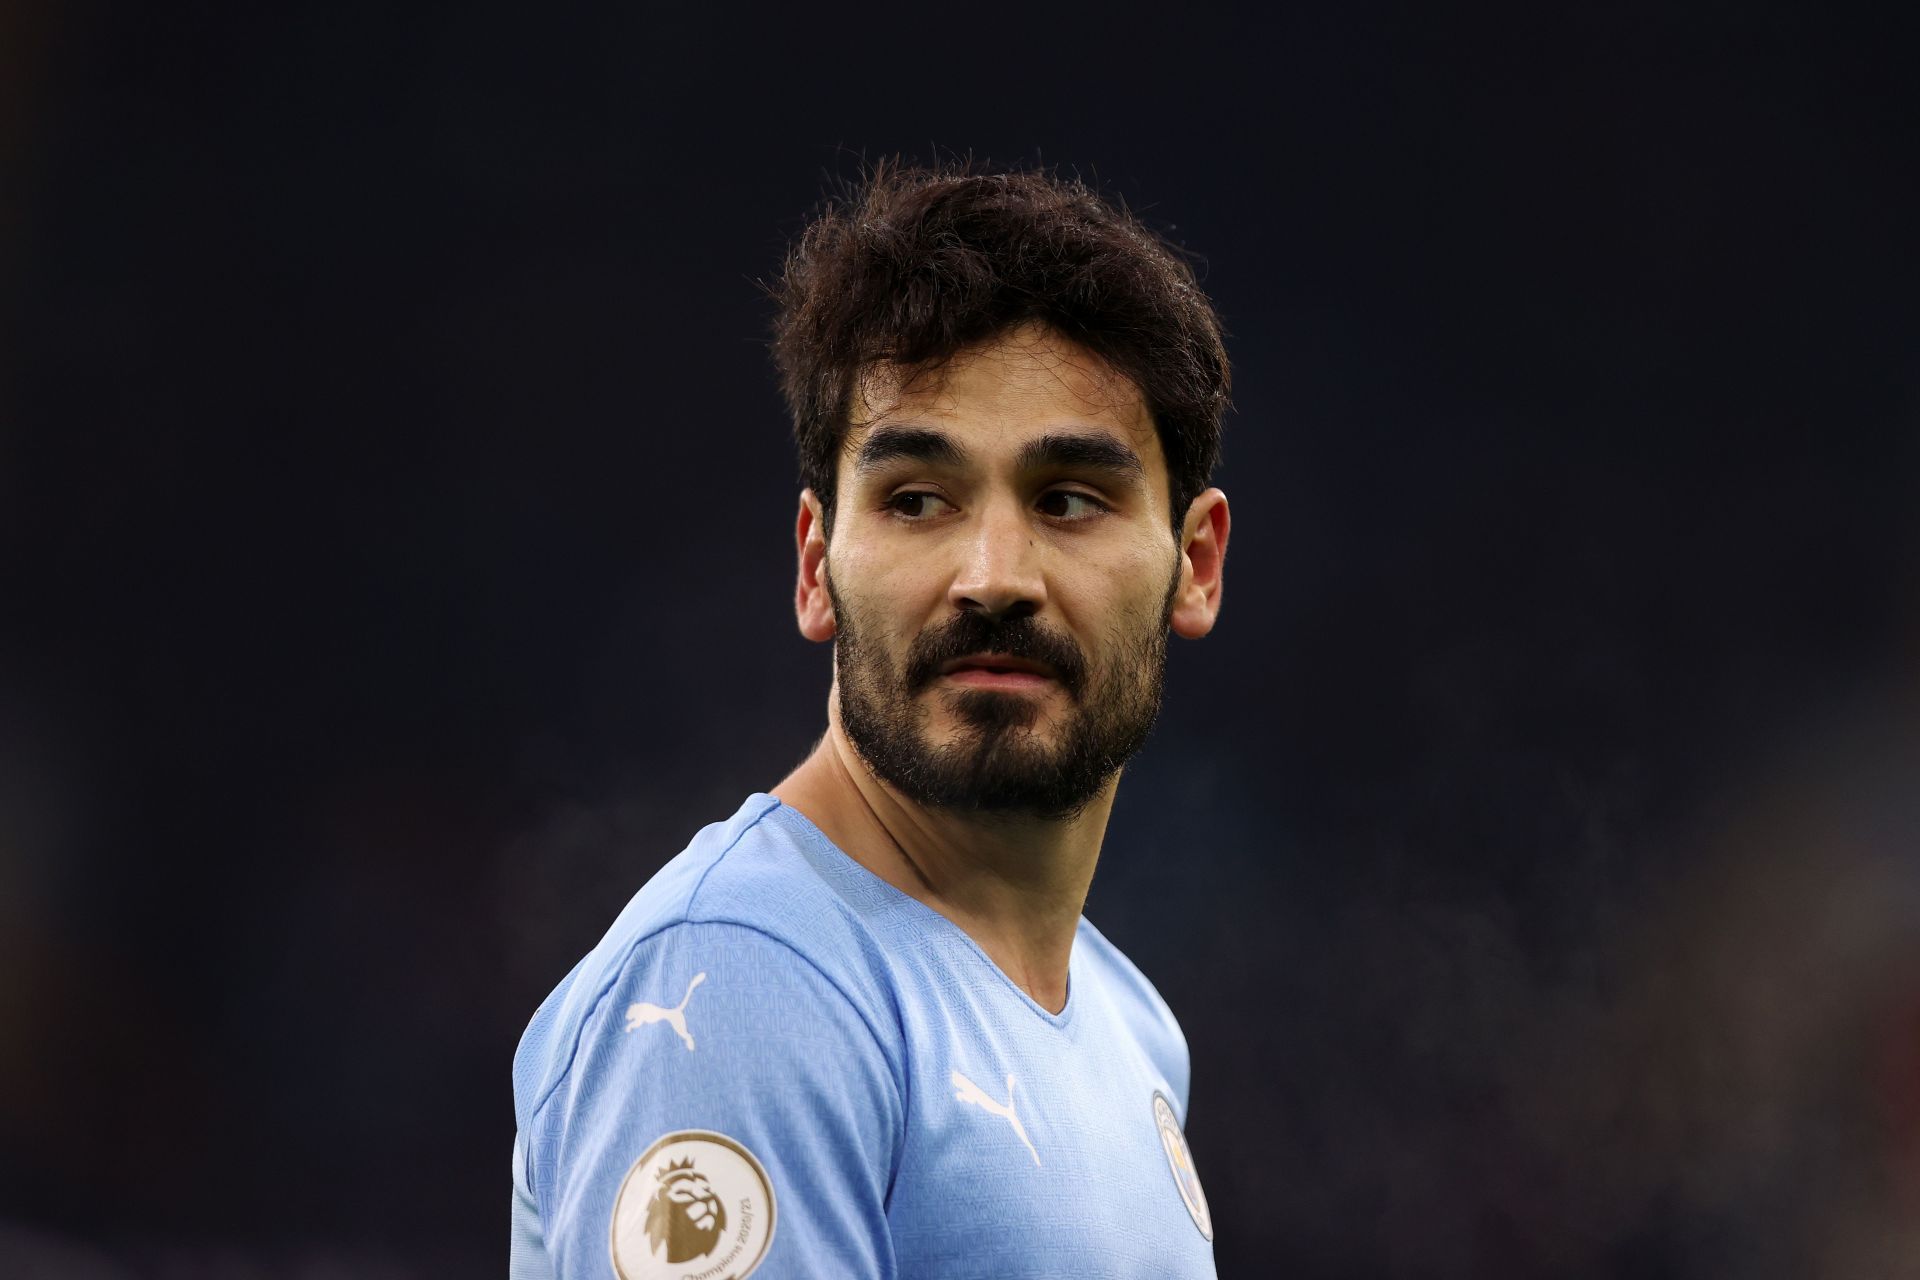 Ilkay Gundogan was a standout performer for Manchester City.